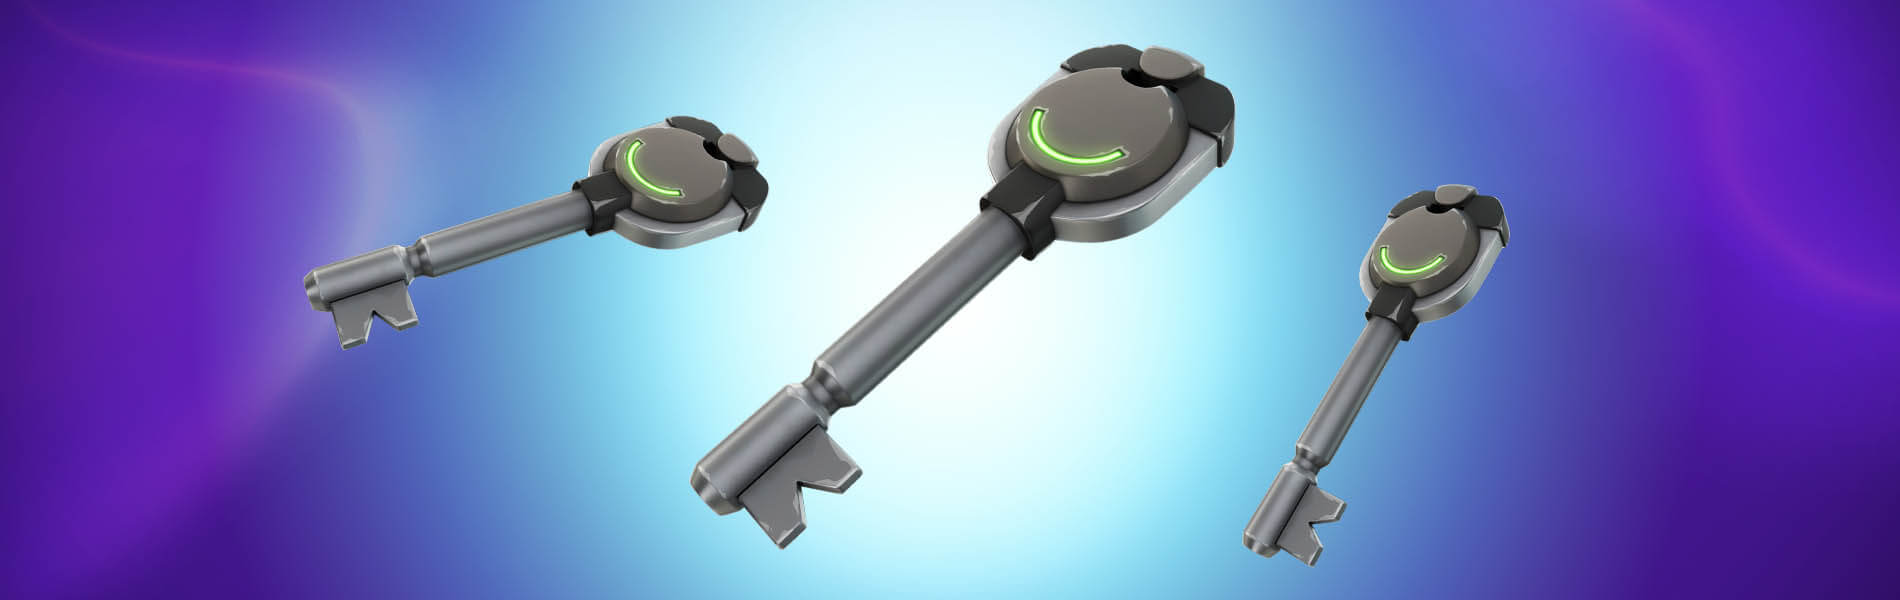 A promotional image from Fortnite showing keys used to unlock vaults